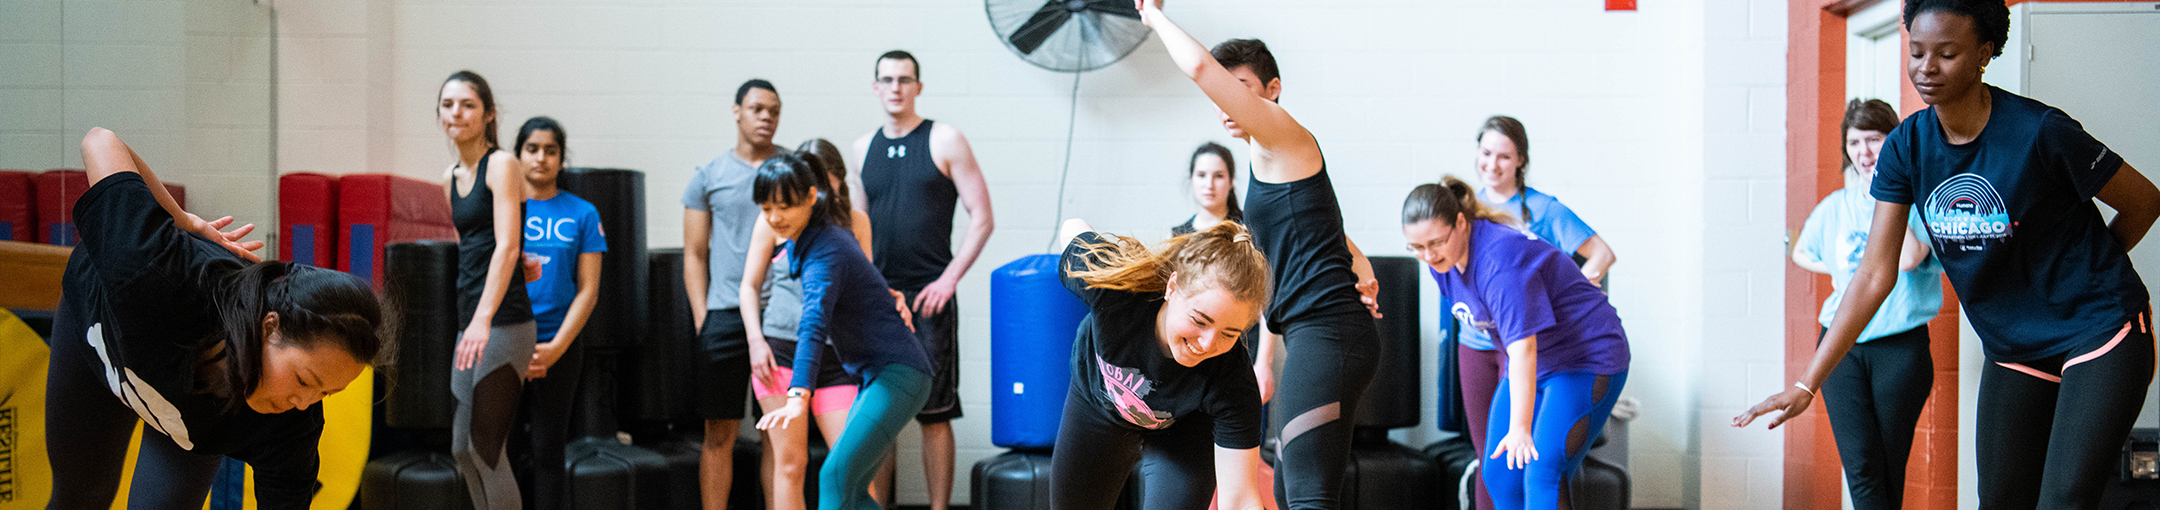 Students participating in a wellness course in an SLC dance studio